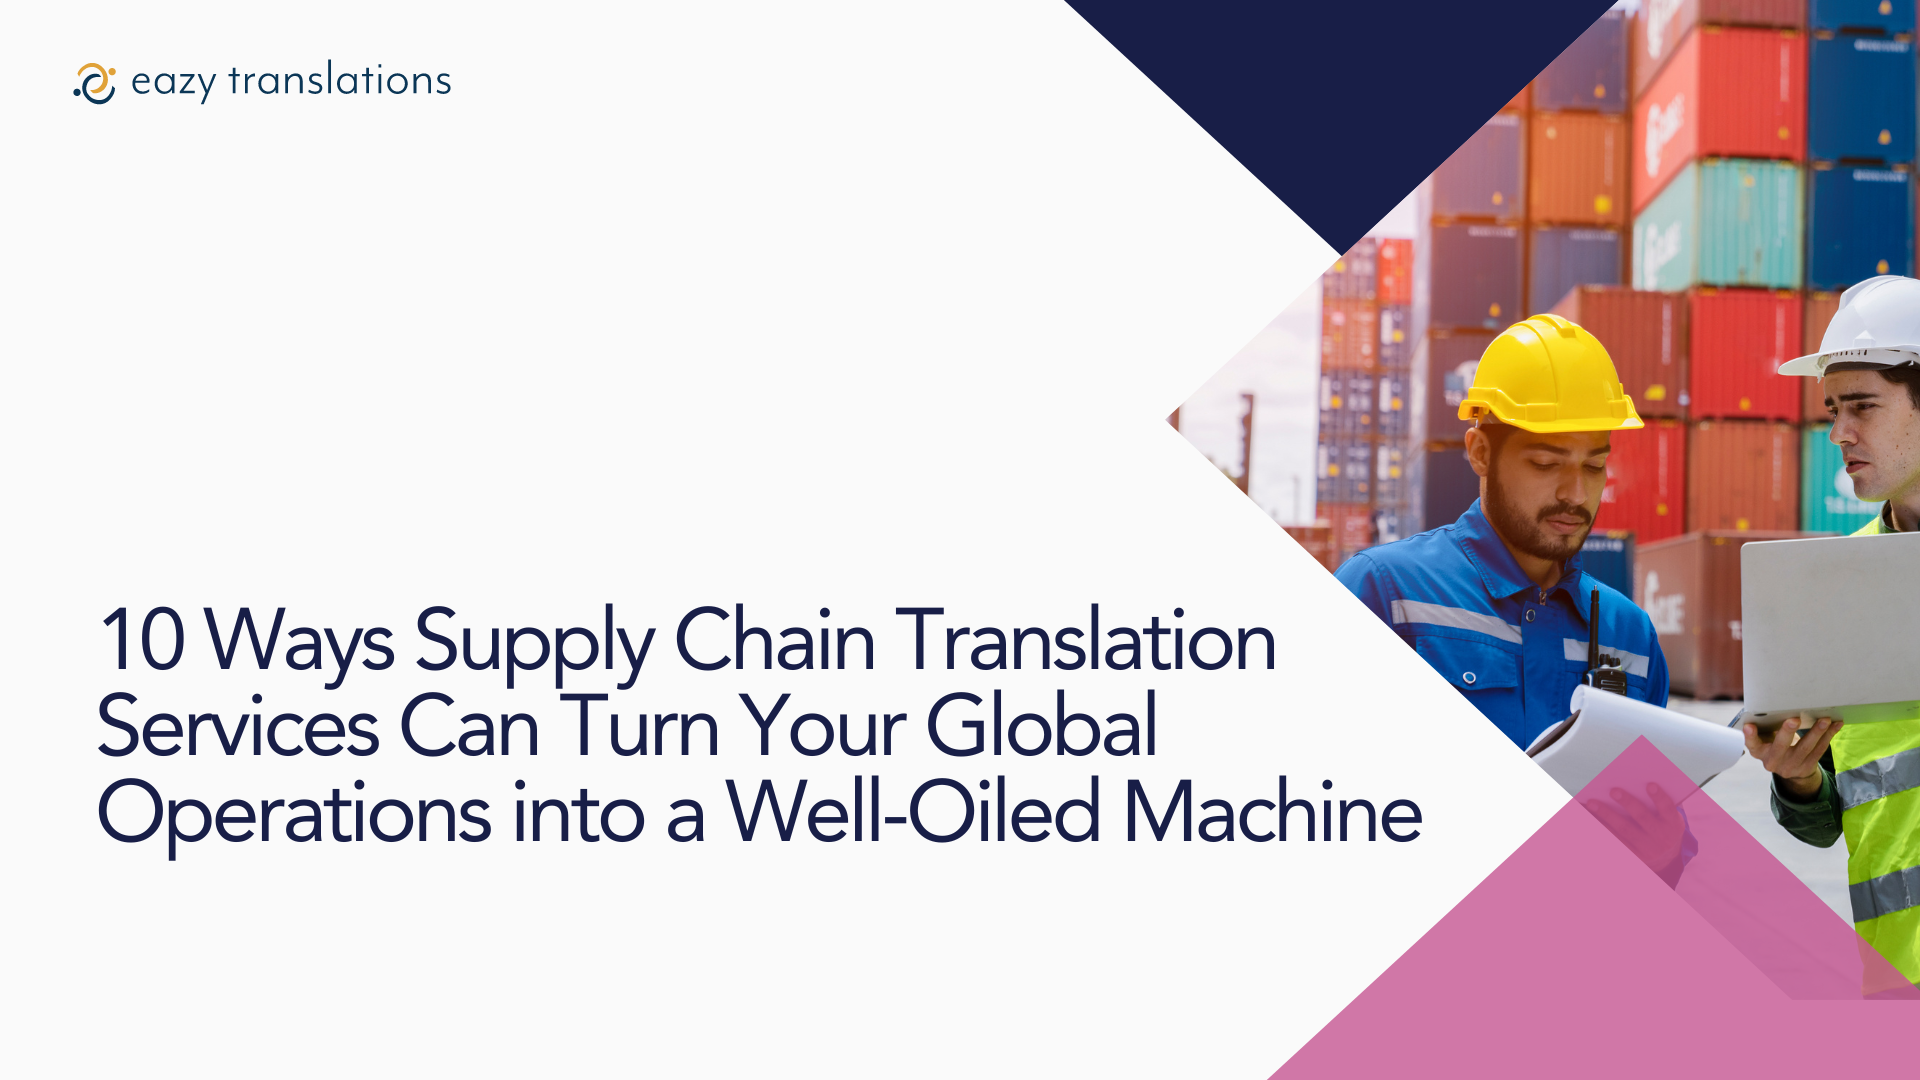 Supply Chain Translation Services